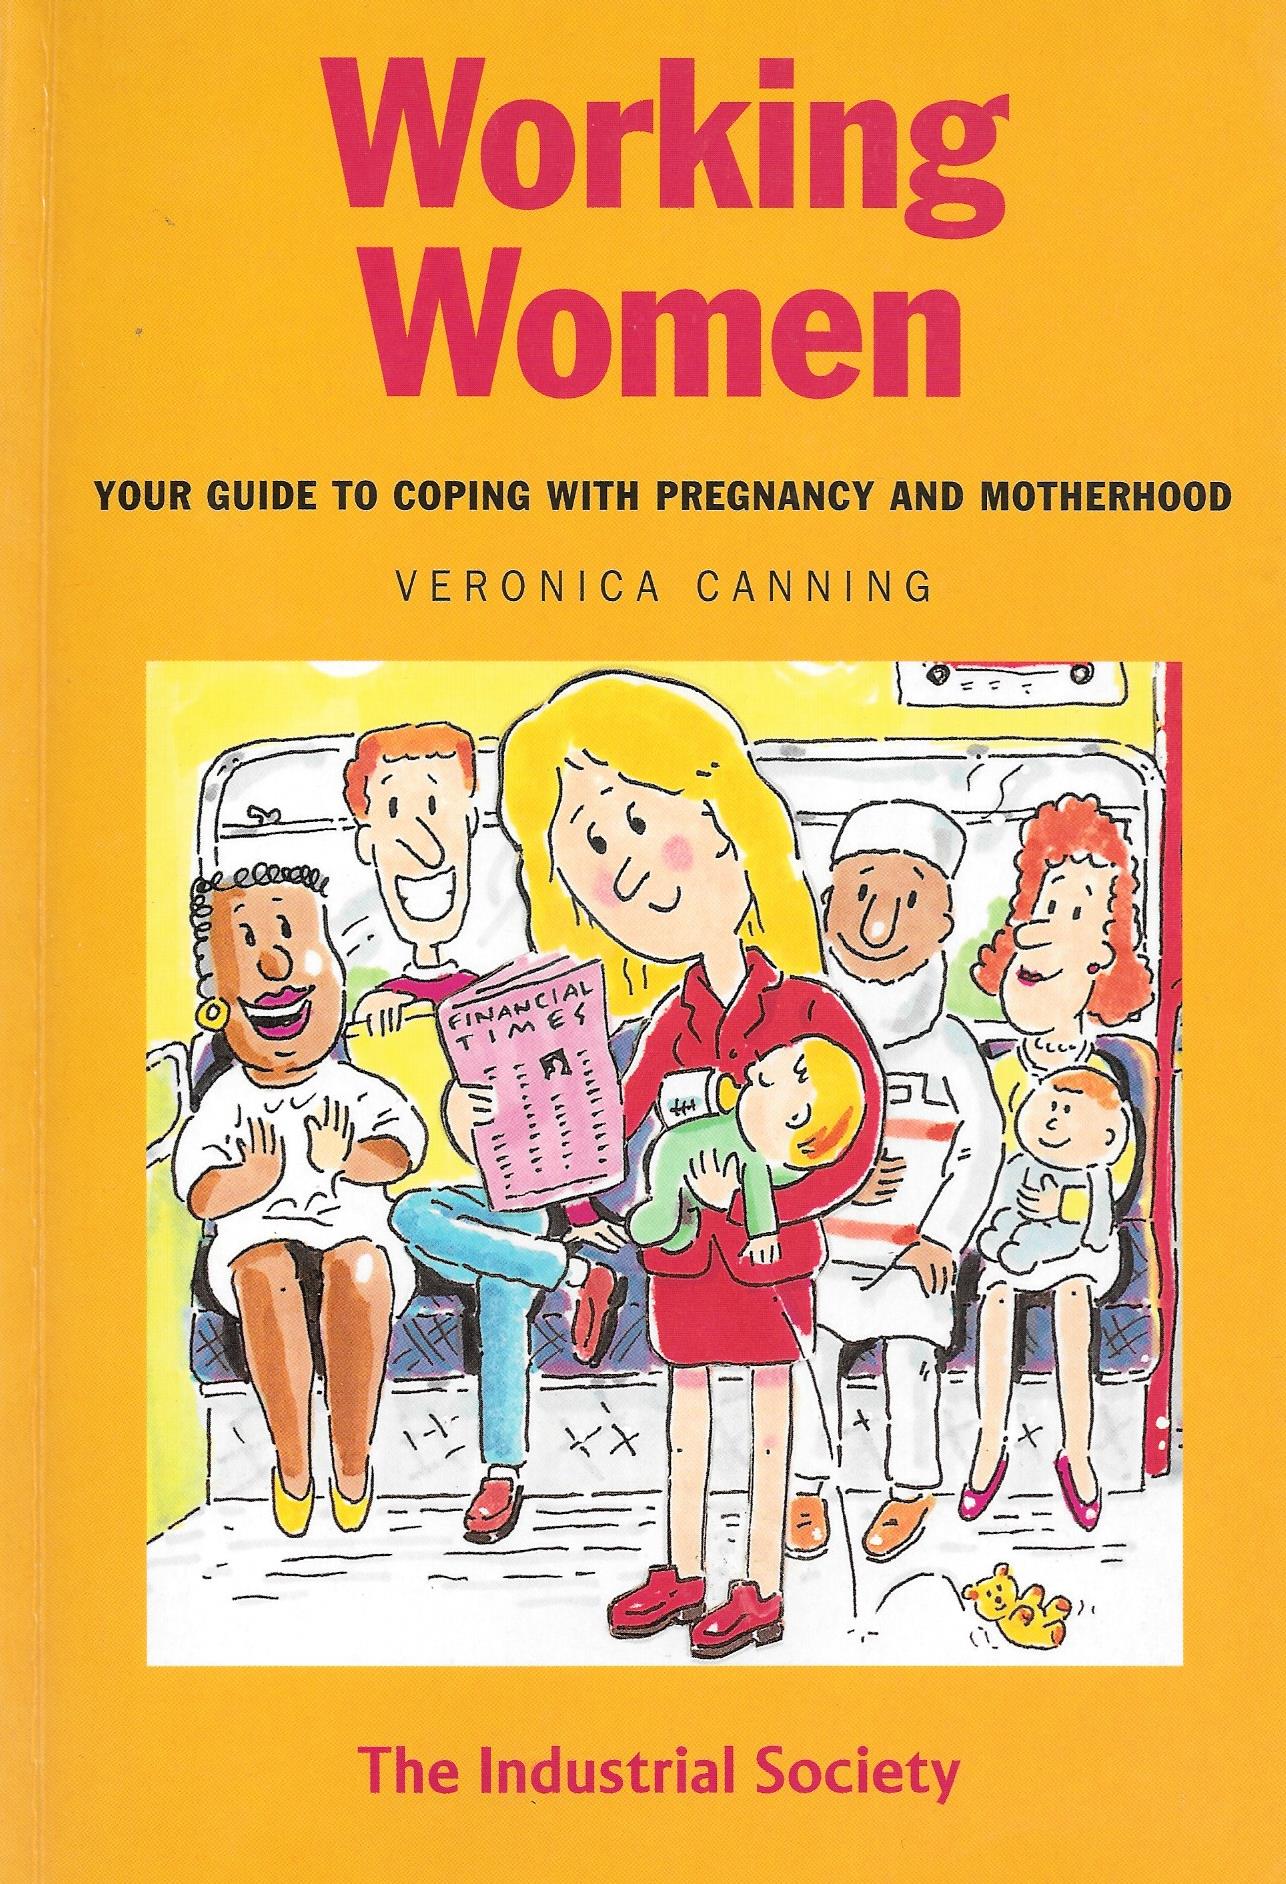 Working Women: Your Guide to Coping with Pregnancy and Motherhood